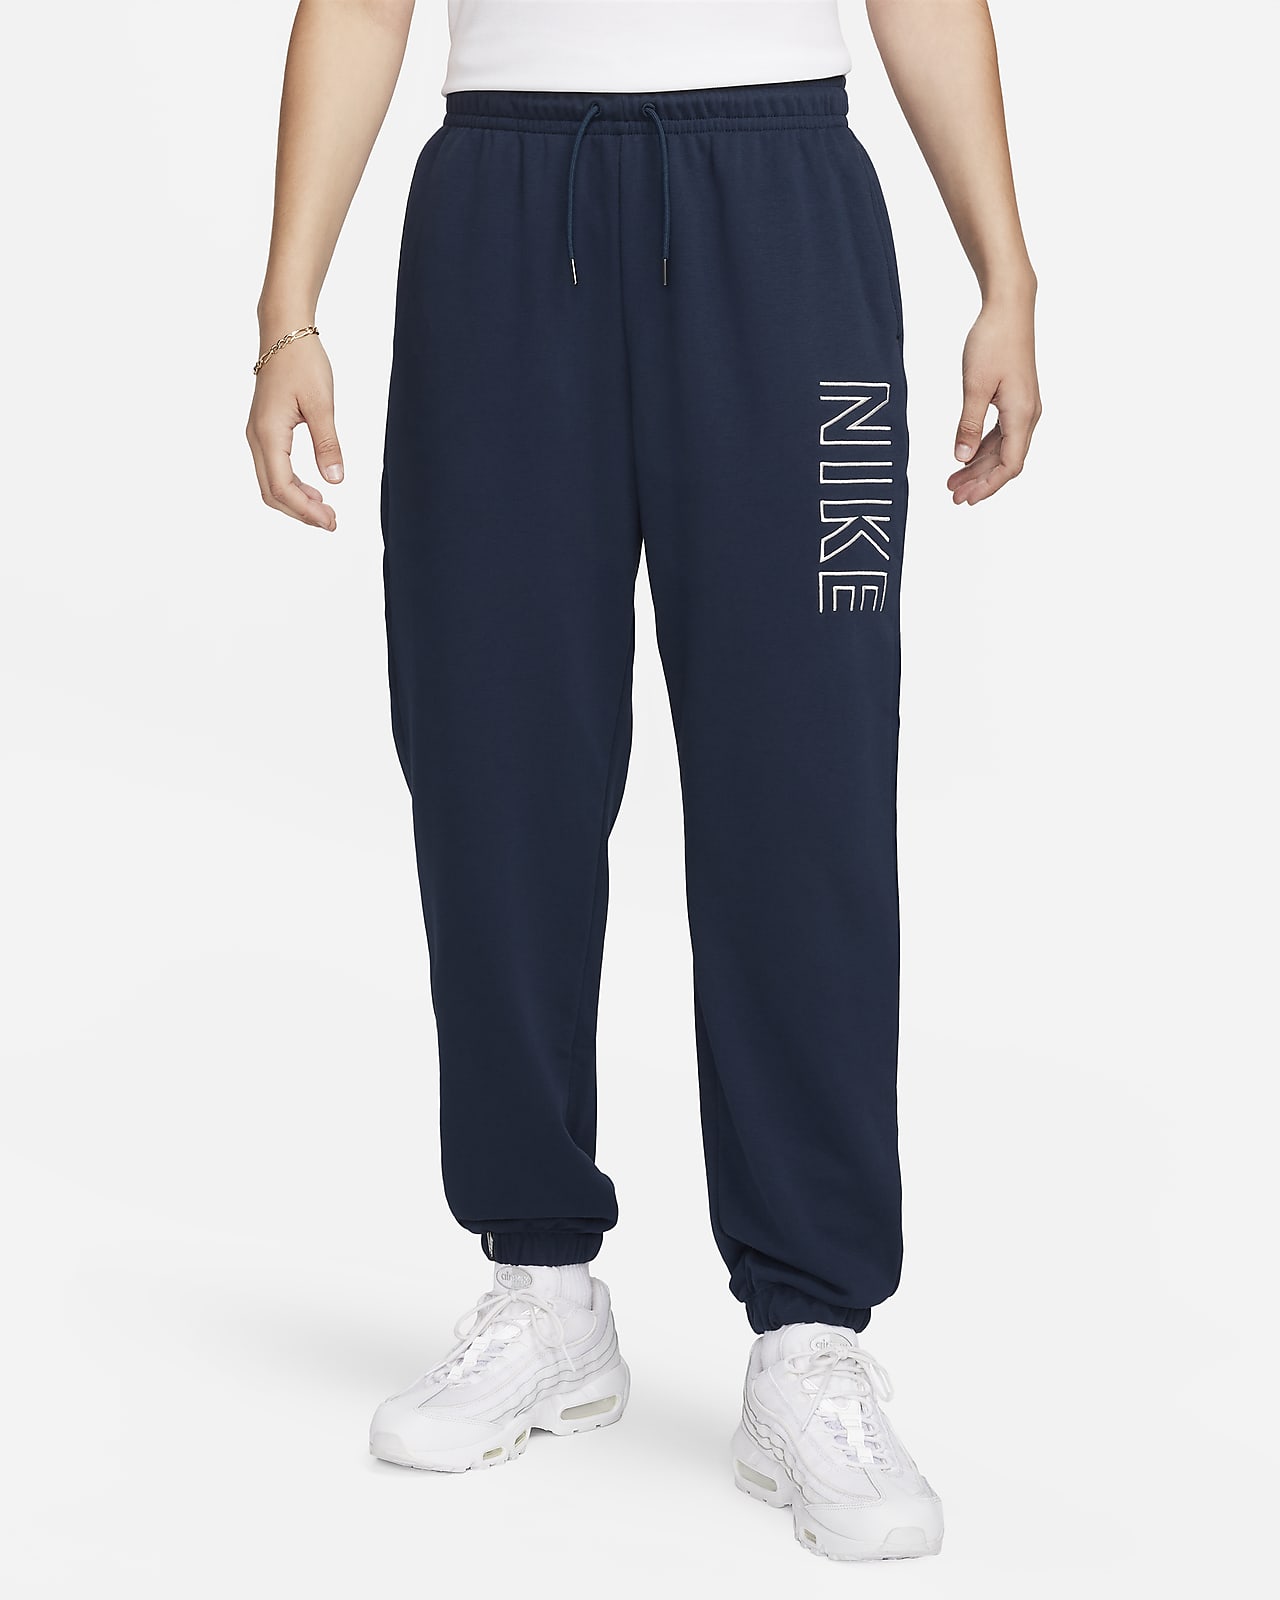 https://static.nike.com/a/images/t_PDP_1280_v1/f_auto,q_auto:eco/027d85df-d8c1-4c15-bbbb-fa21169f776b/joggers-de-tiro-alto-oversized-sportswear-GMpcJW.png